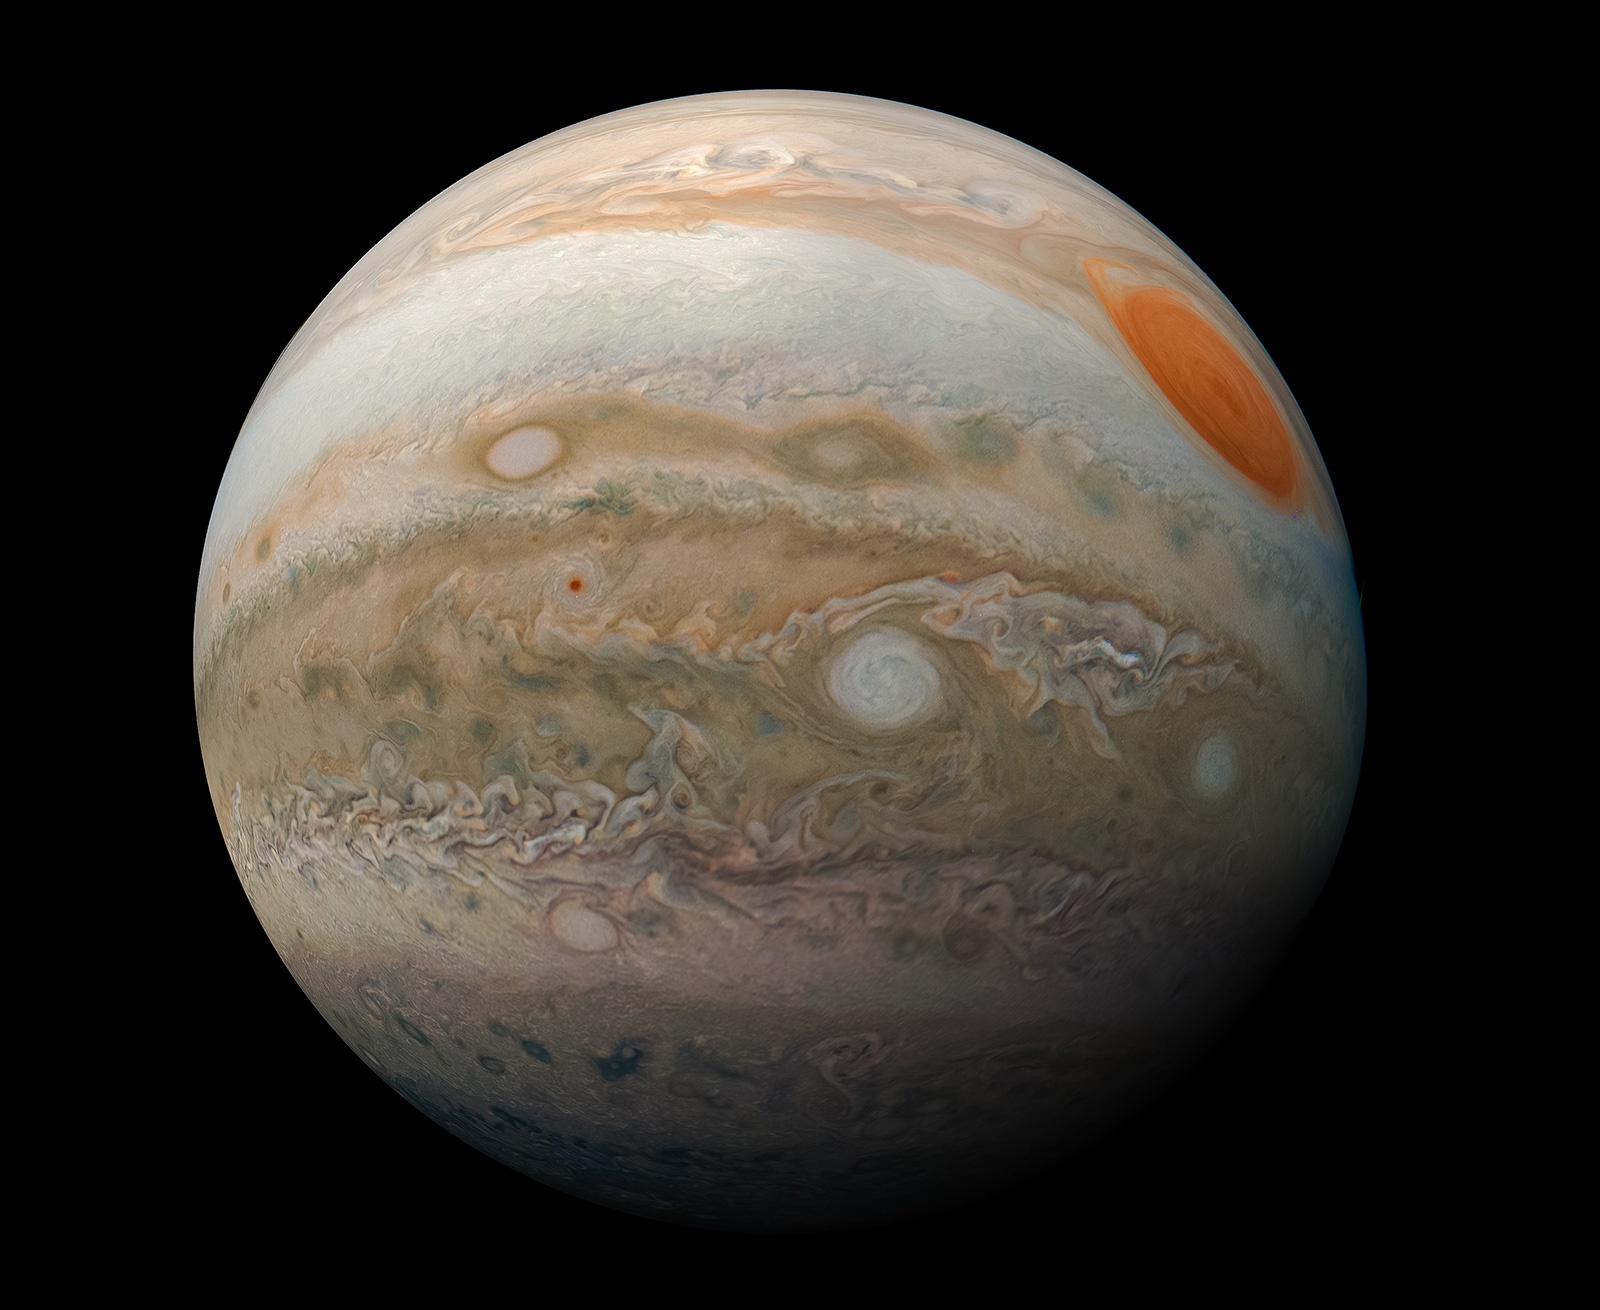 With its new expansion, Juno will visit Jupiter’s Moons